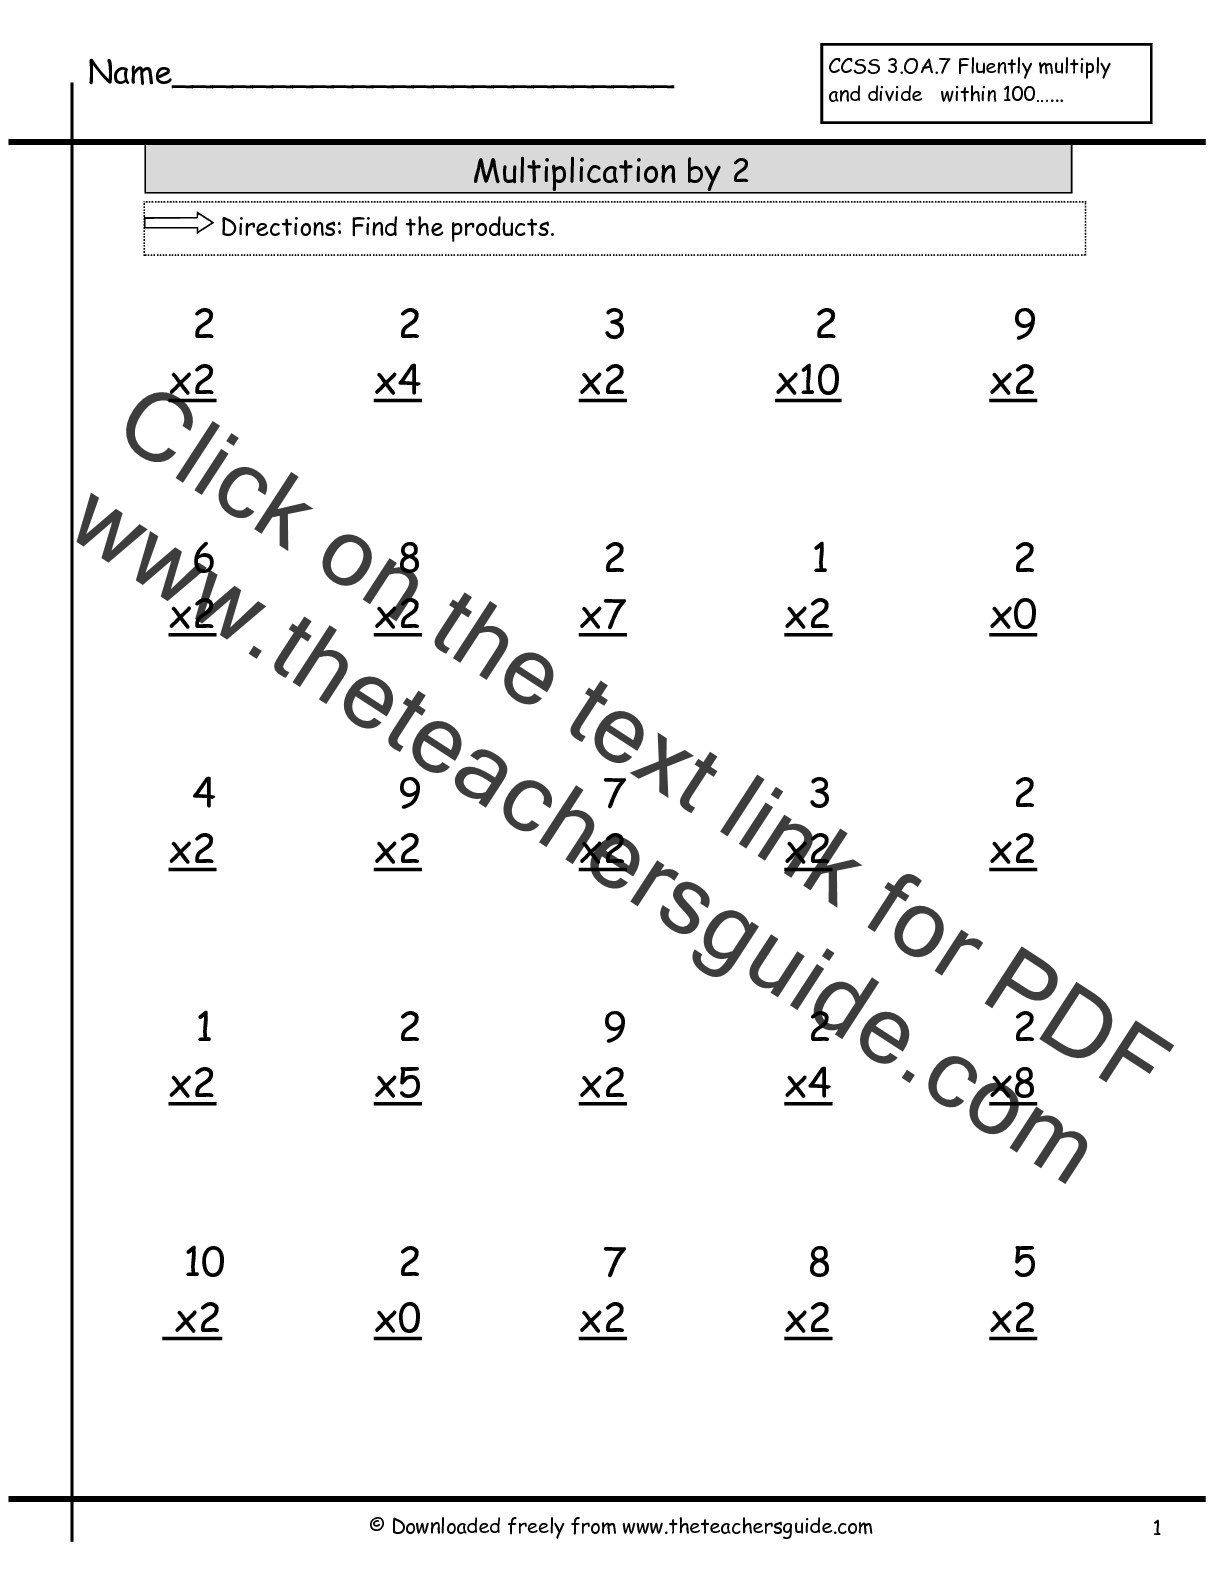 Worksheet With Multiplication Facts